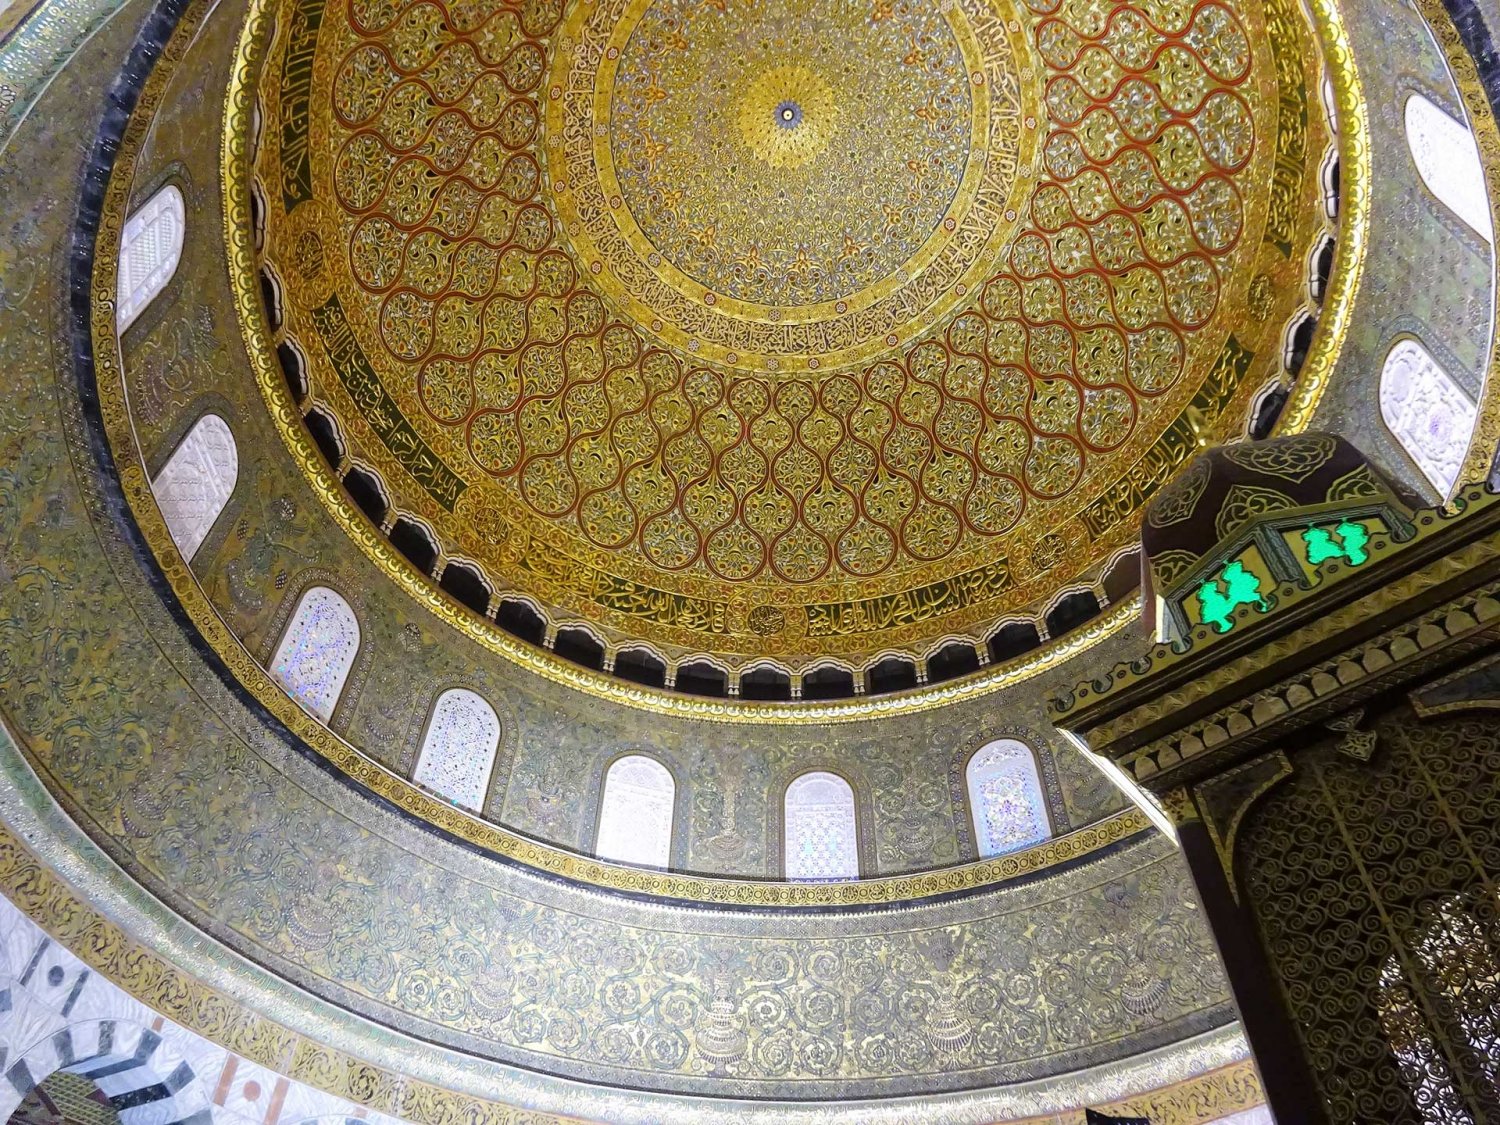 Arabesque detailing of the inside of the Dome of the Rock, located in Jerusalem's Al-Aqsa Mosque compound